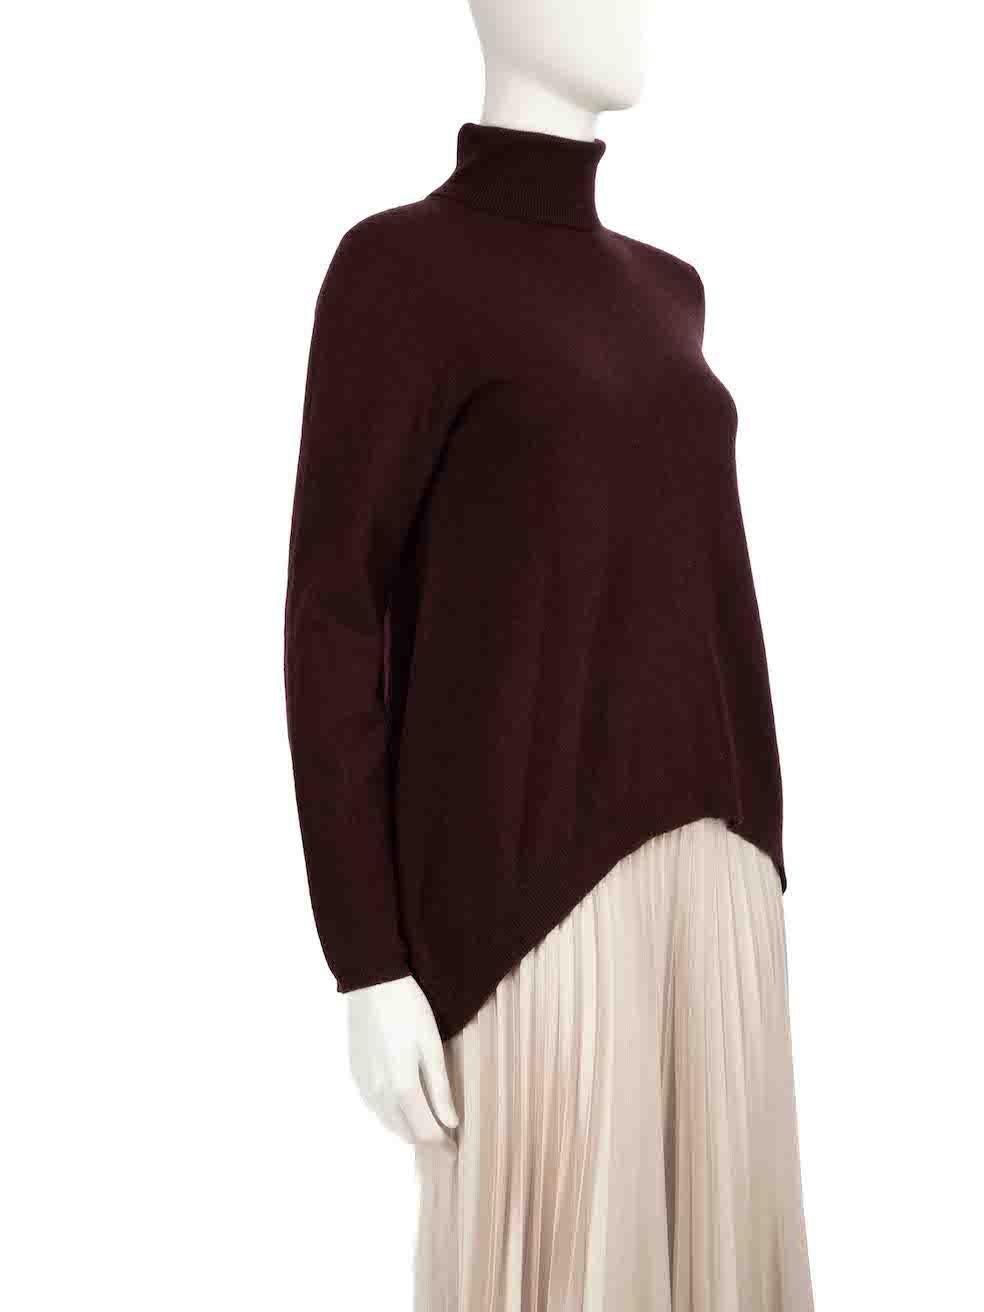 CONDITION is Never worn. No visible wear to turtleneck is evident on this new Brunello Cucinelli designer resale item.
 
 
 
 Details
 
 
 Burgundy
 
 Cashmere
 
 Knit jumper
 
 Turtleneck
 
 Long sleeves
 
 
 
 
 
 Made in Italy
 
 
 
 Composition
